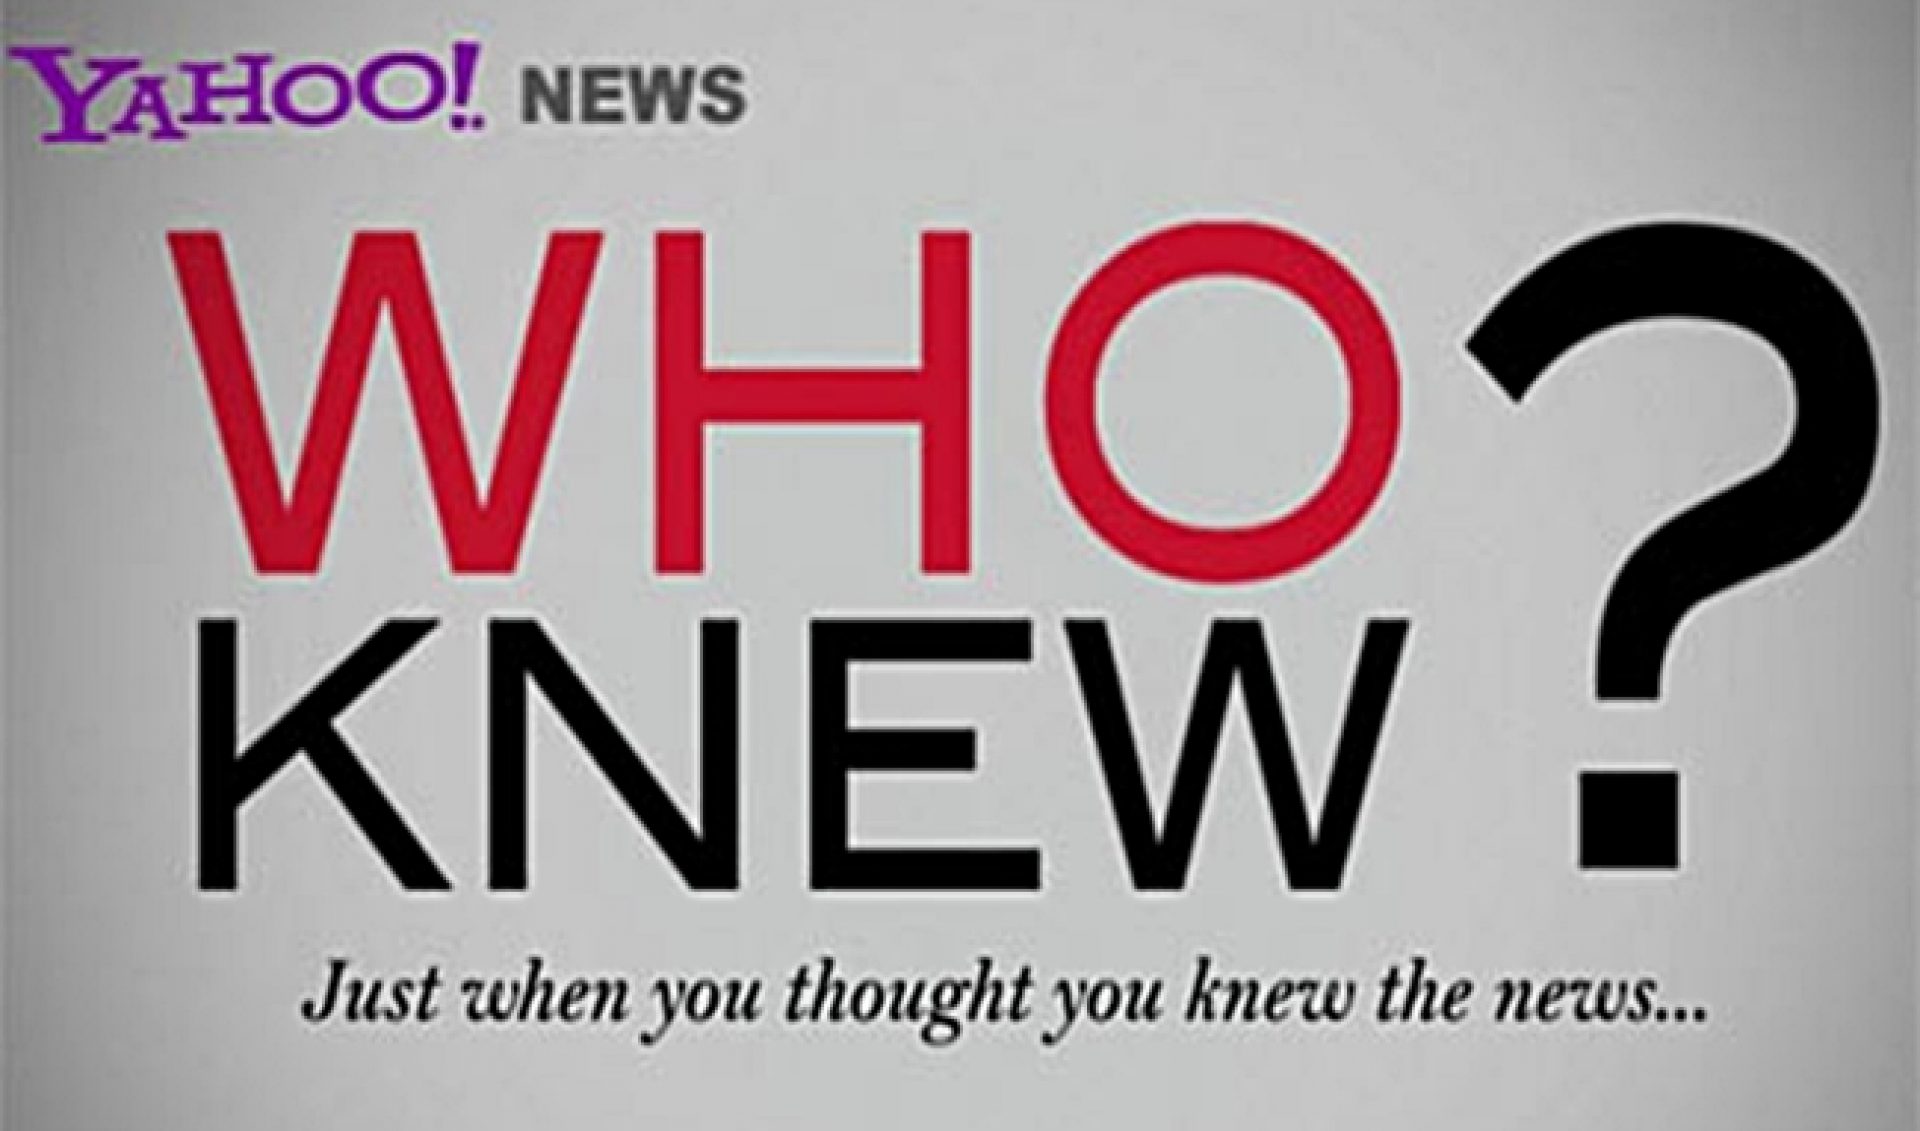 Yahoo’s ‘Who Knew?’ Returns For Another Season Of Fabulous Facts